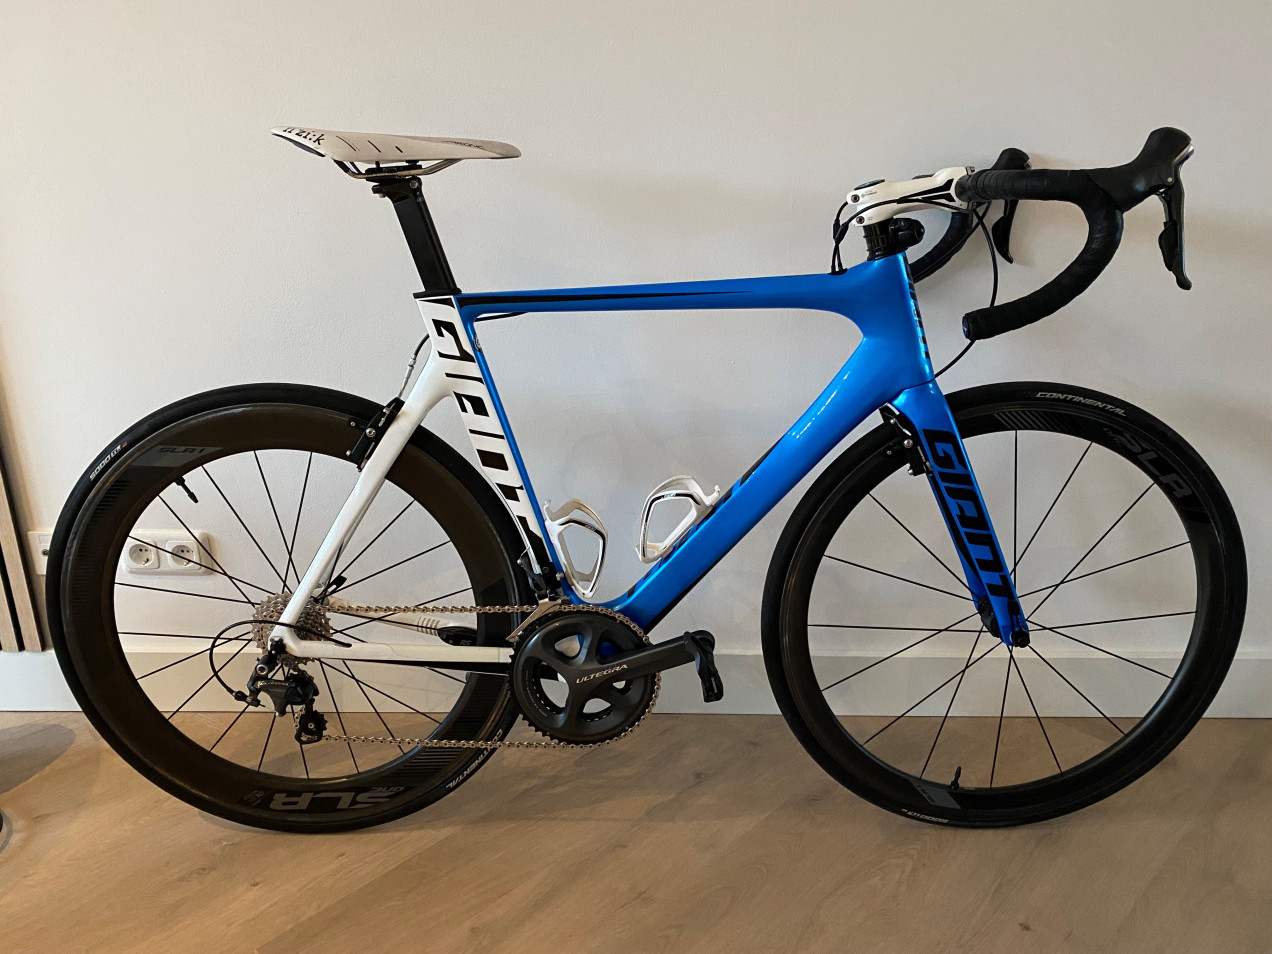 Giant Propel Advanced SL 0 used in 56 cm | buycycle